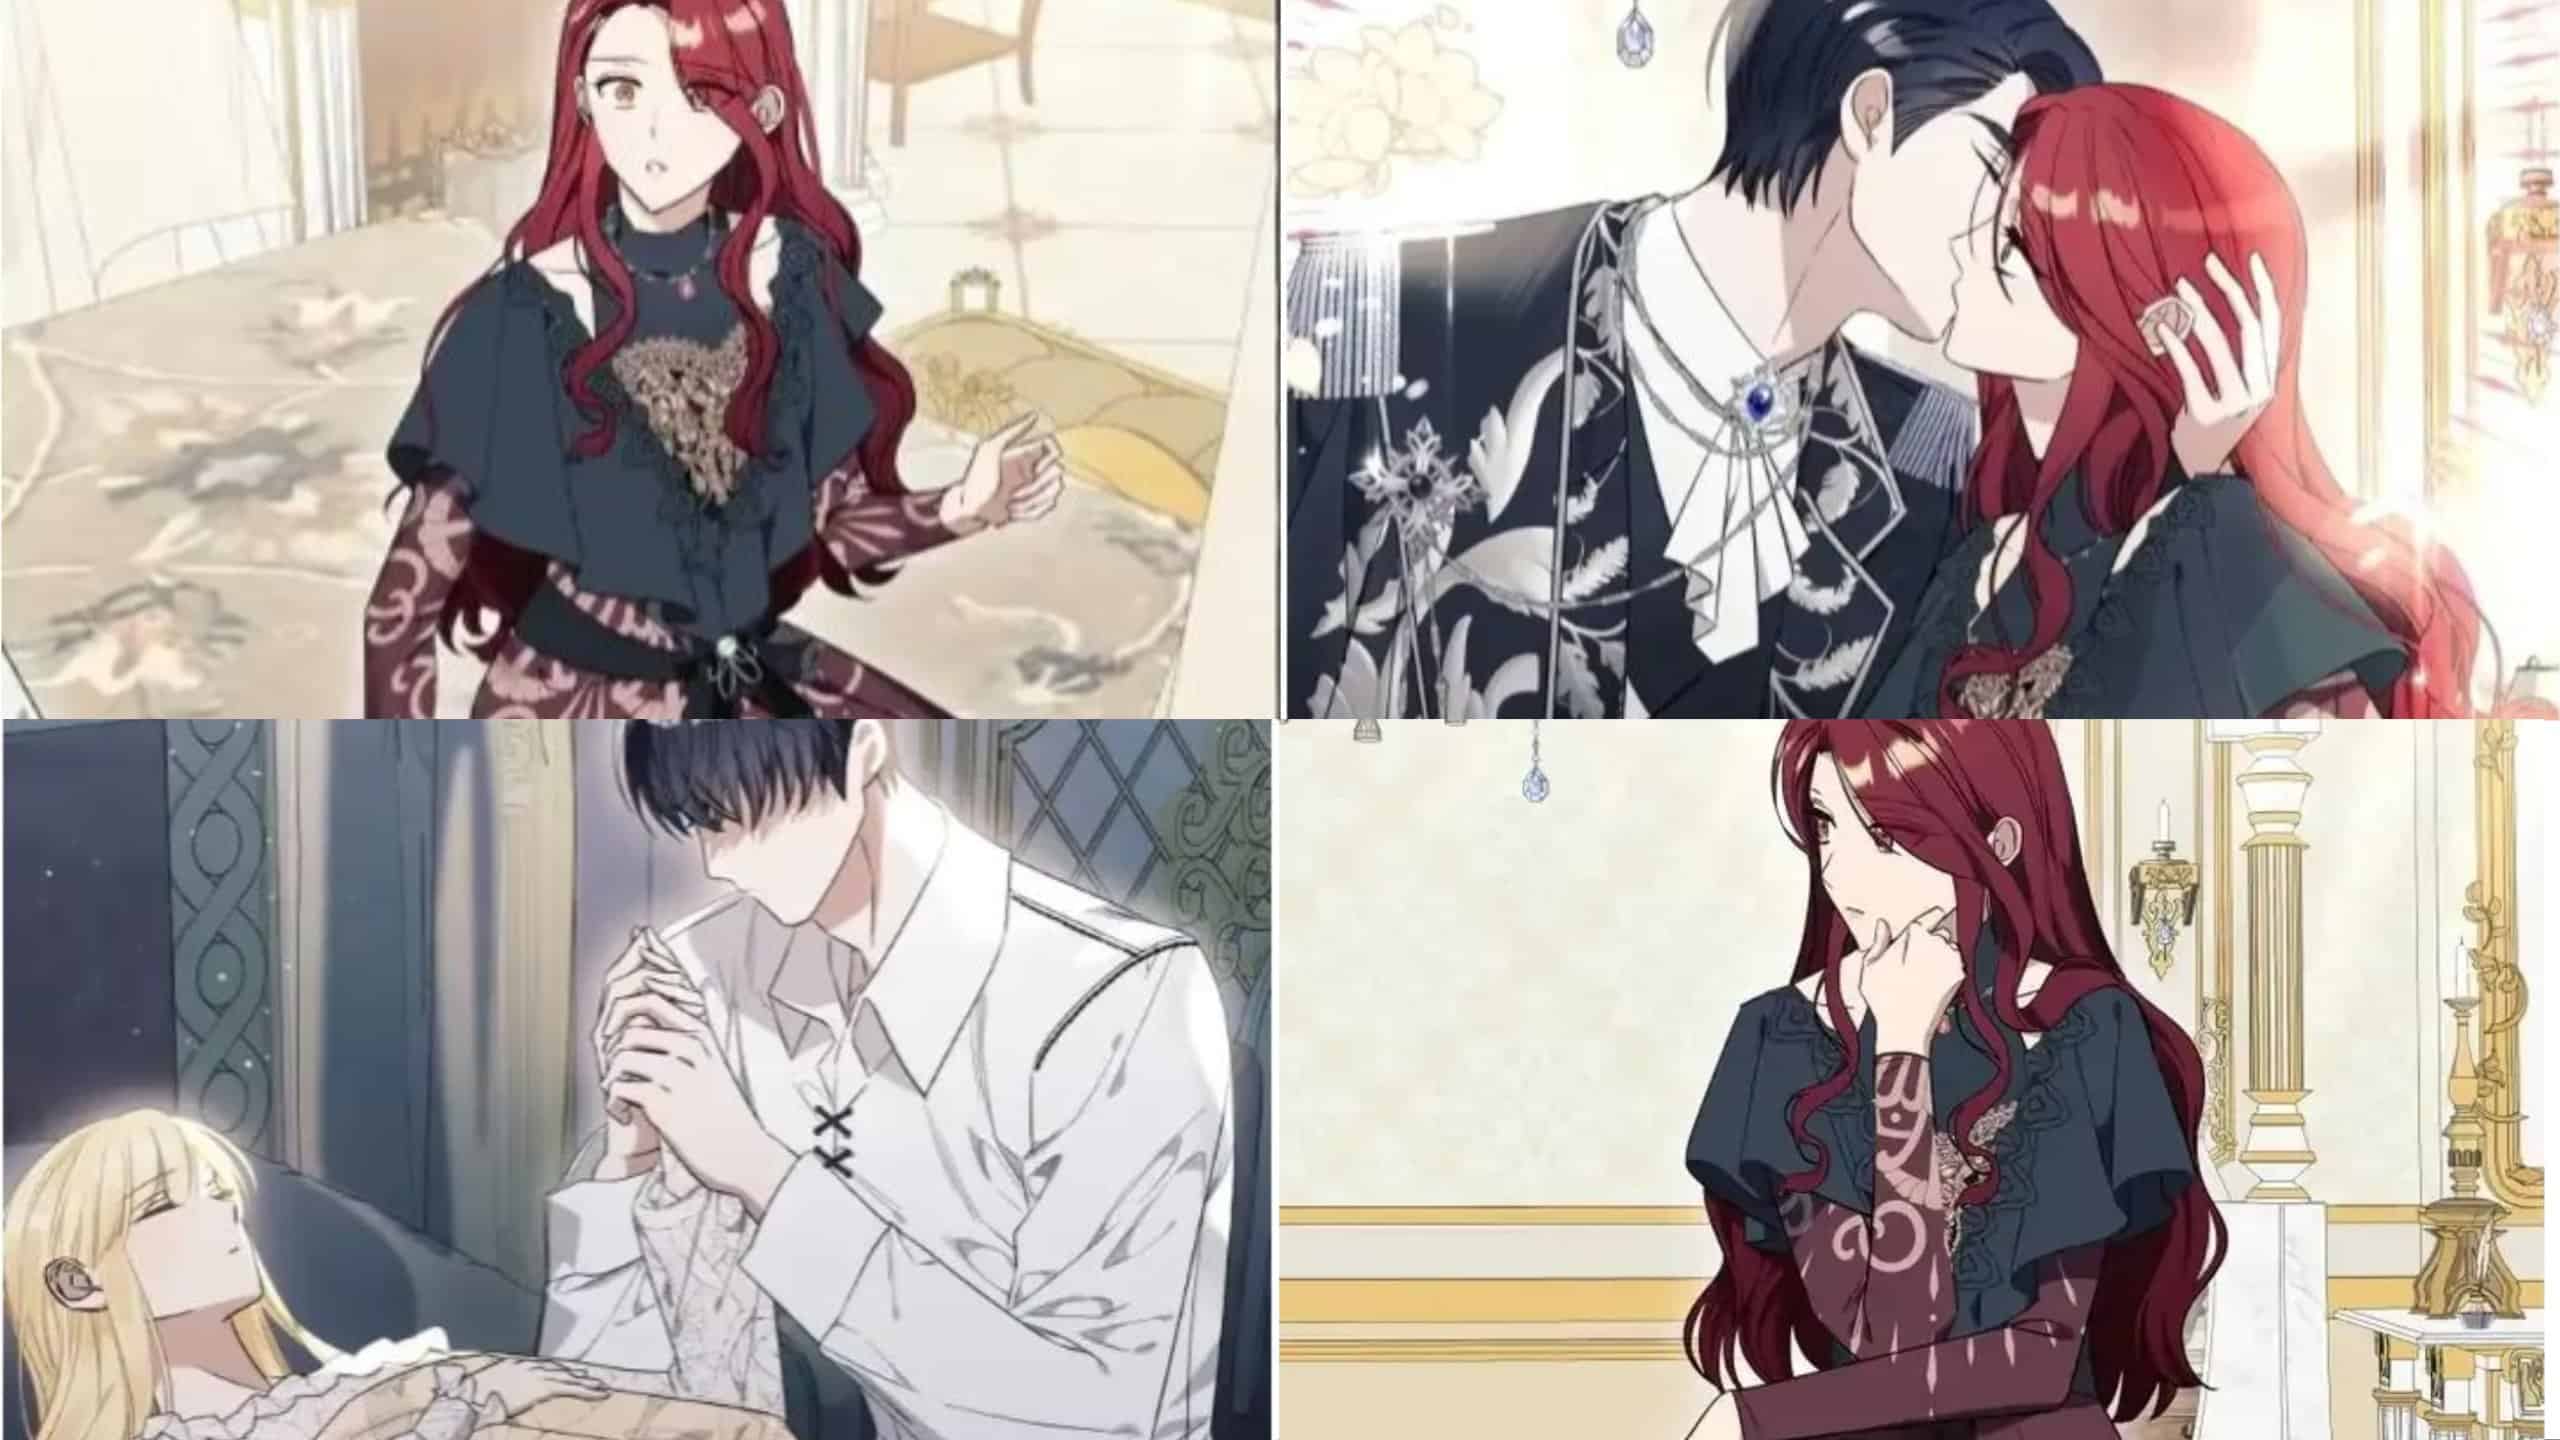 I Thought It’s a Common Possession - Stills from Chapter 28